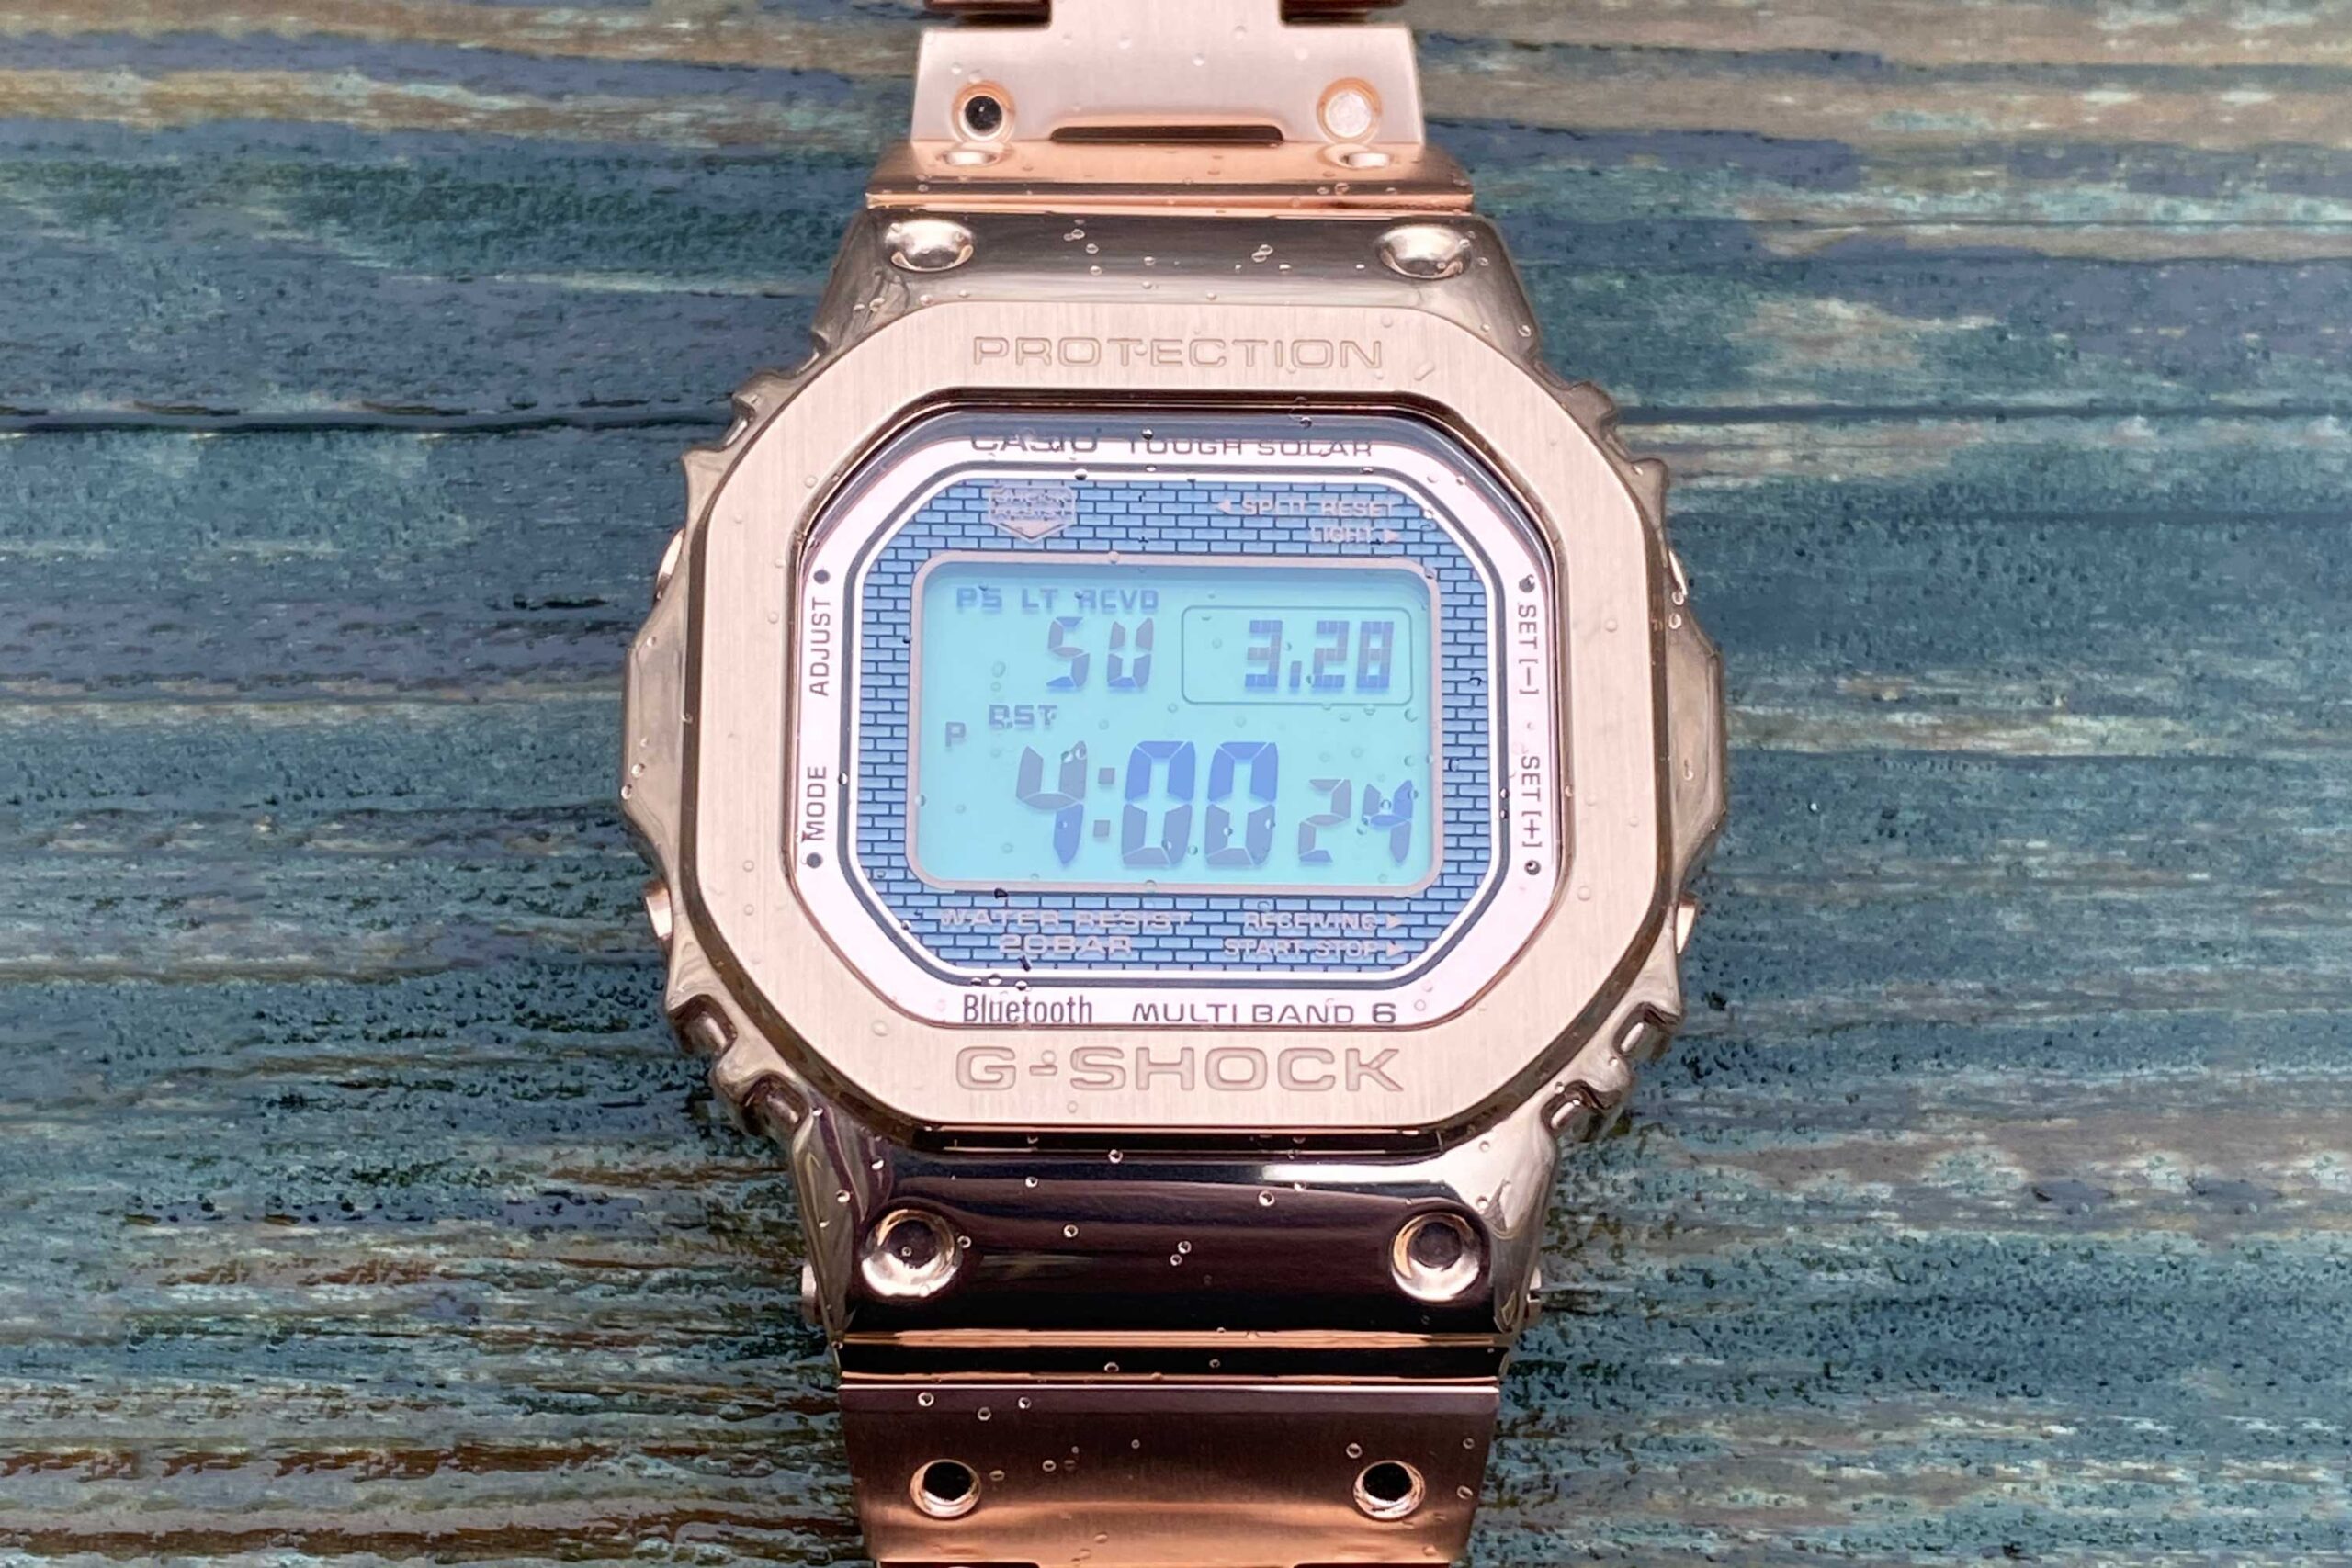 Introducing the Casio GMW-B5000GD-4 (©Revolution)